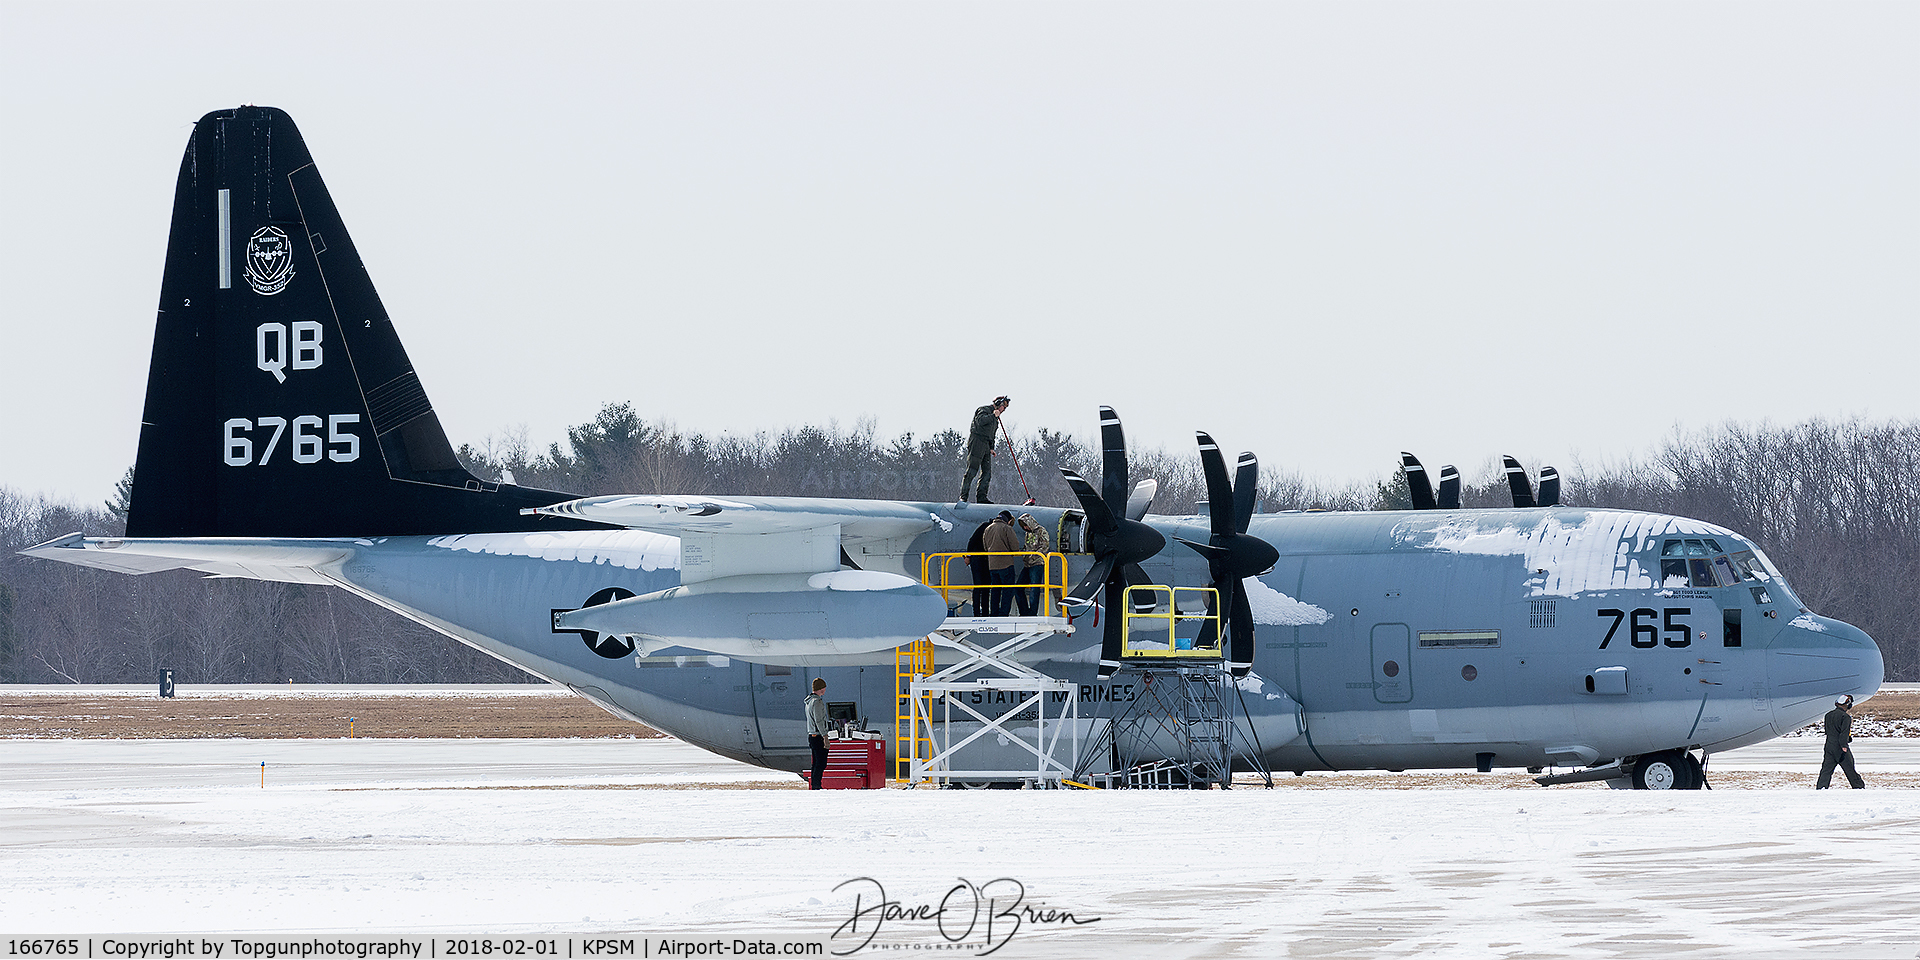 166765, 2005 Lockheed Martin KC-130J Hercules C/N 382-5565, VMGR-352  	MCAS Miramar
little out of it's element in the NH snow.